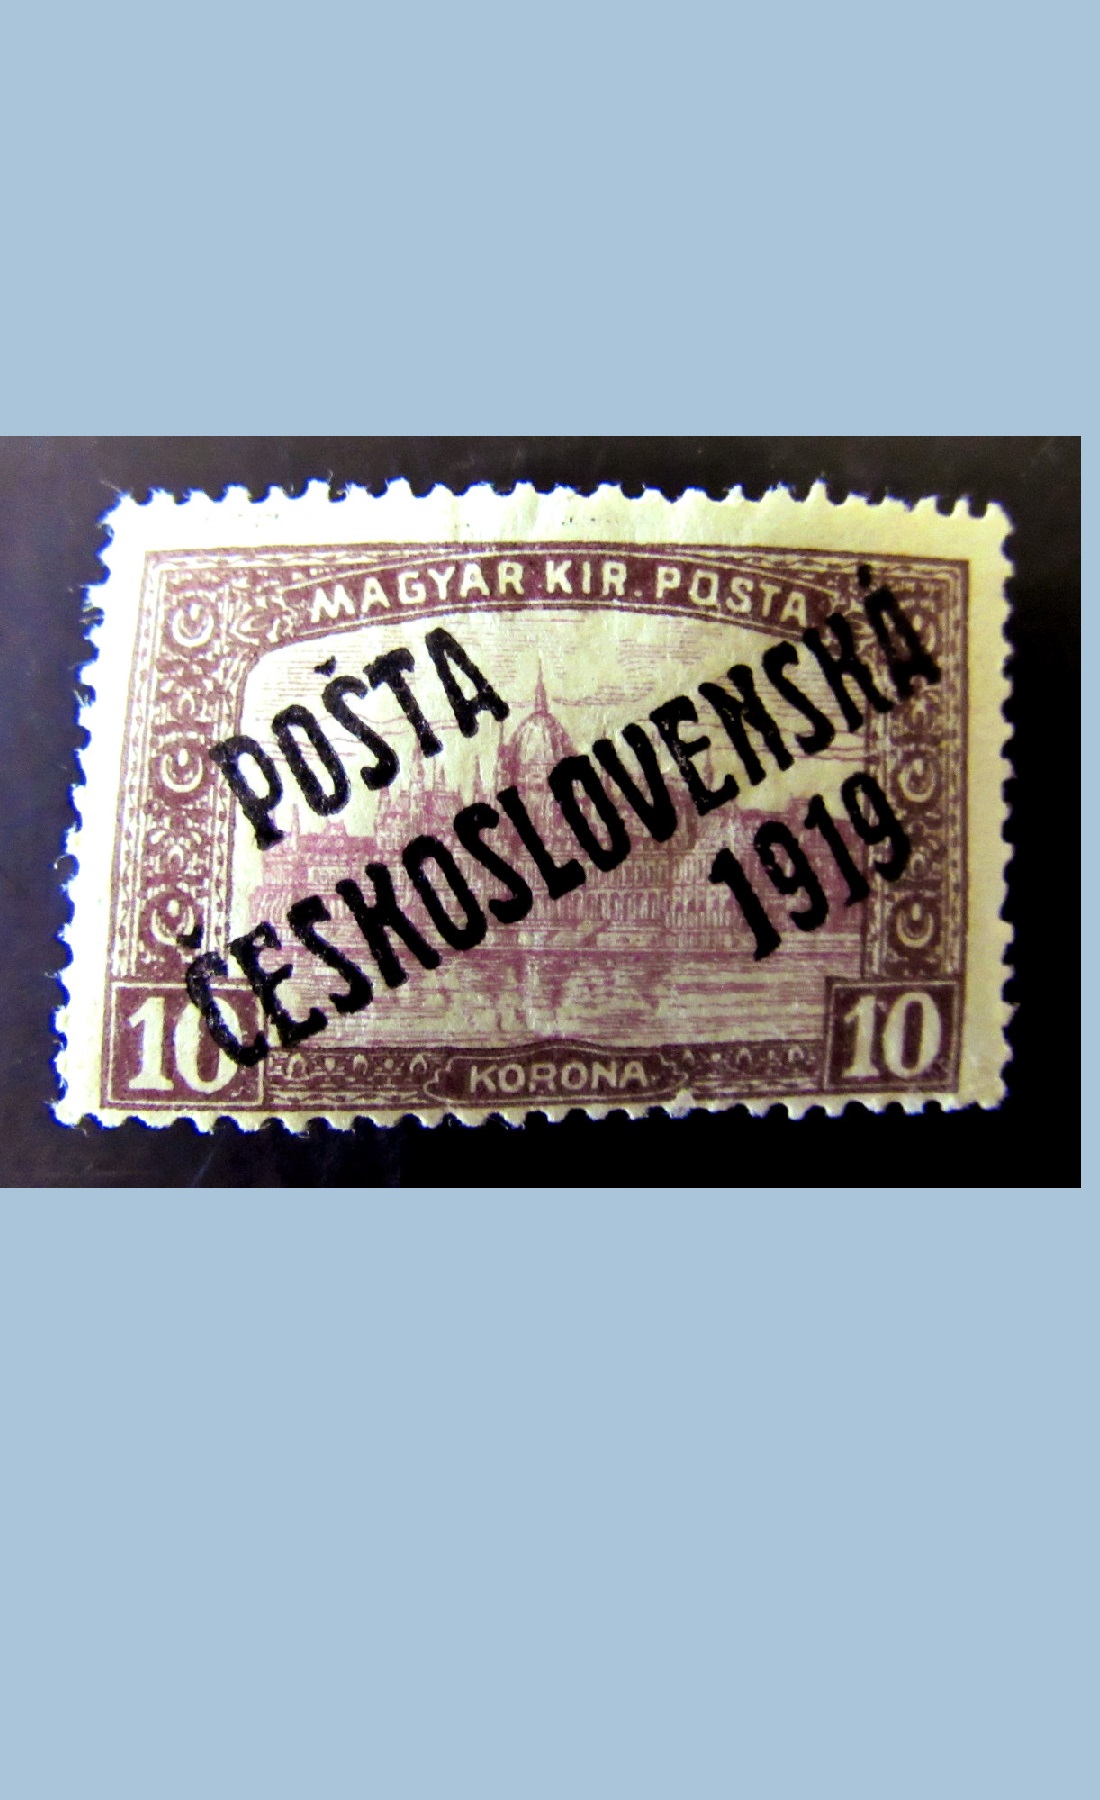 A Very Rare and Most Searched Austro-Hungarian Postage Stamp